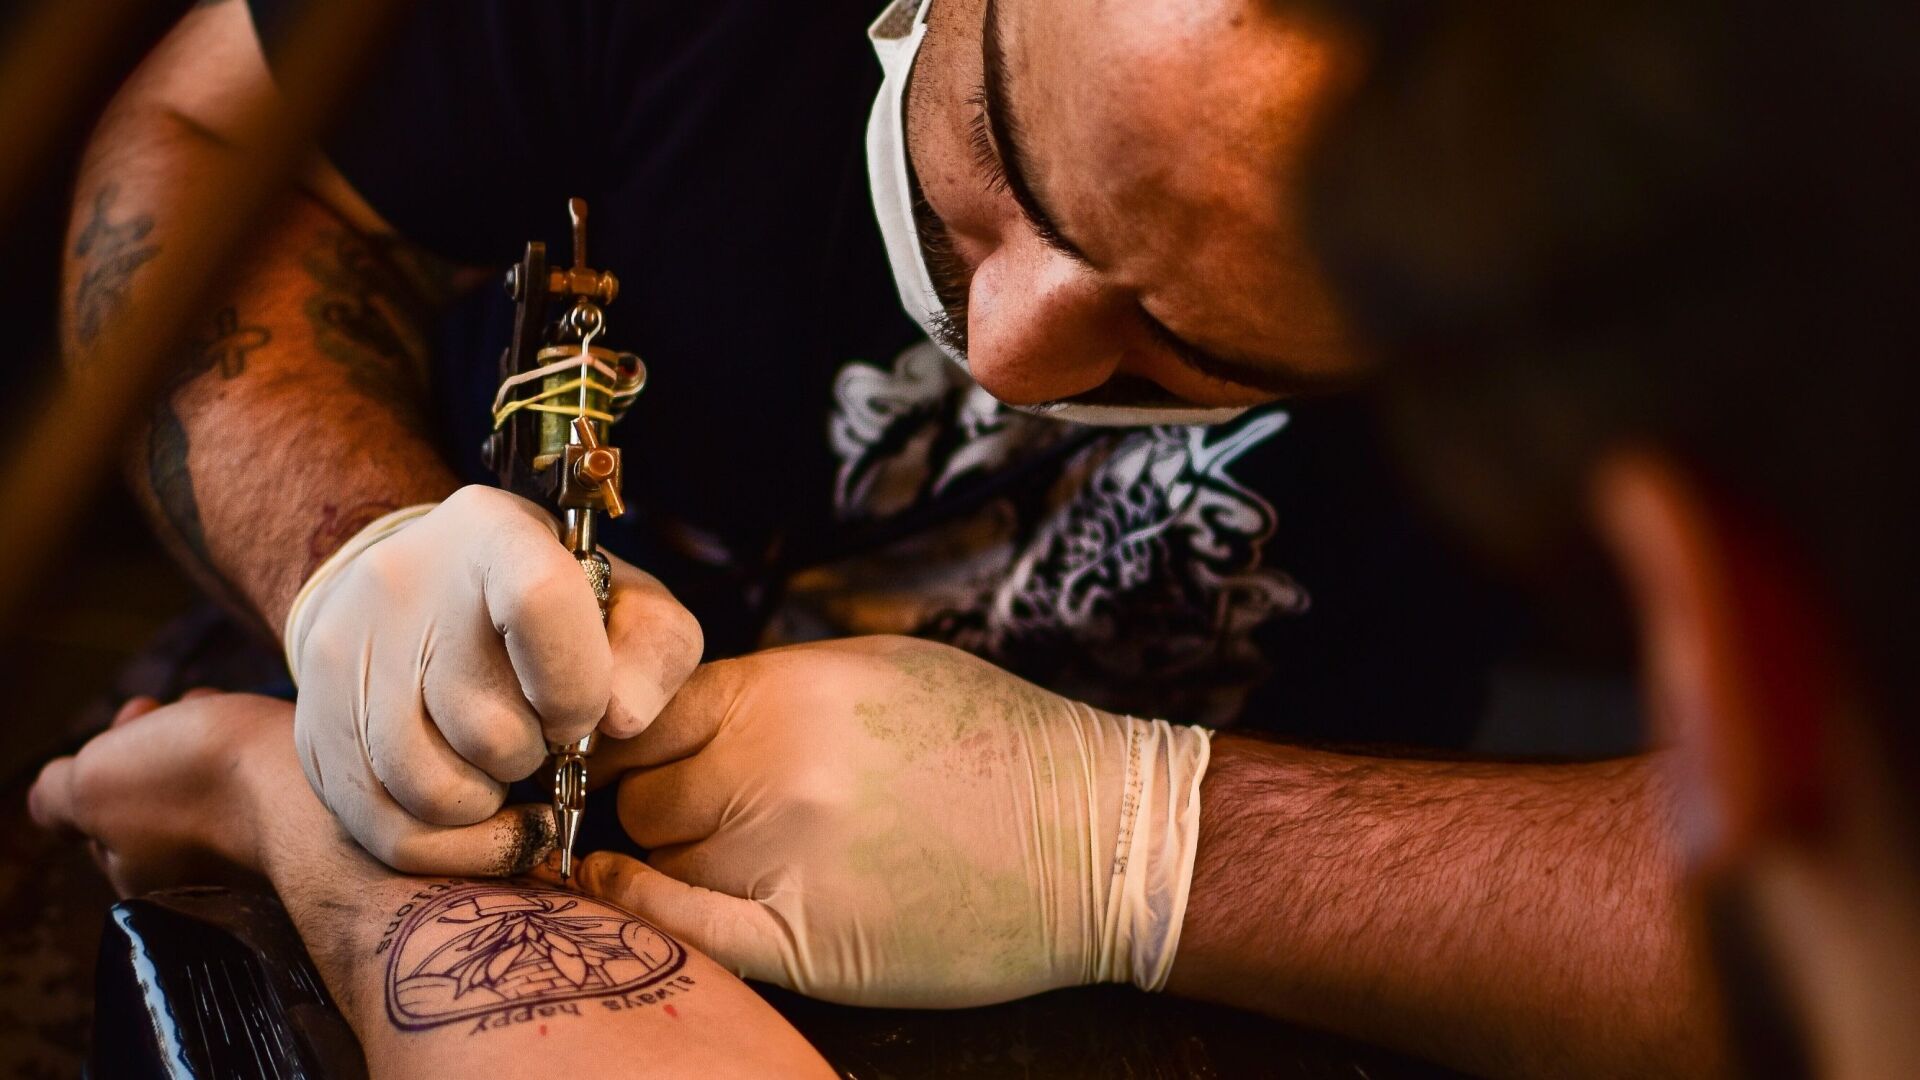 13 Tattoos for Friday the 13th Tattoo Shop Flash Sales  Money